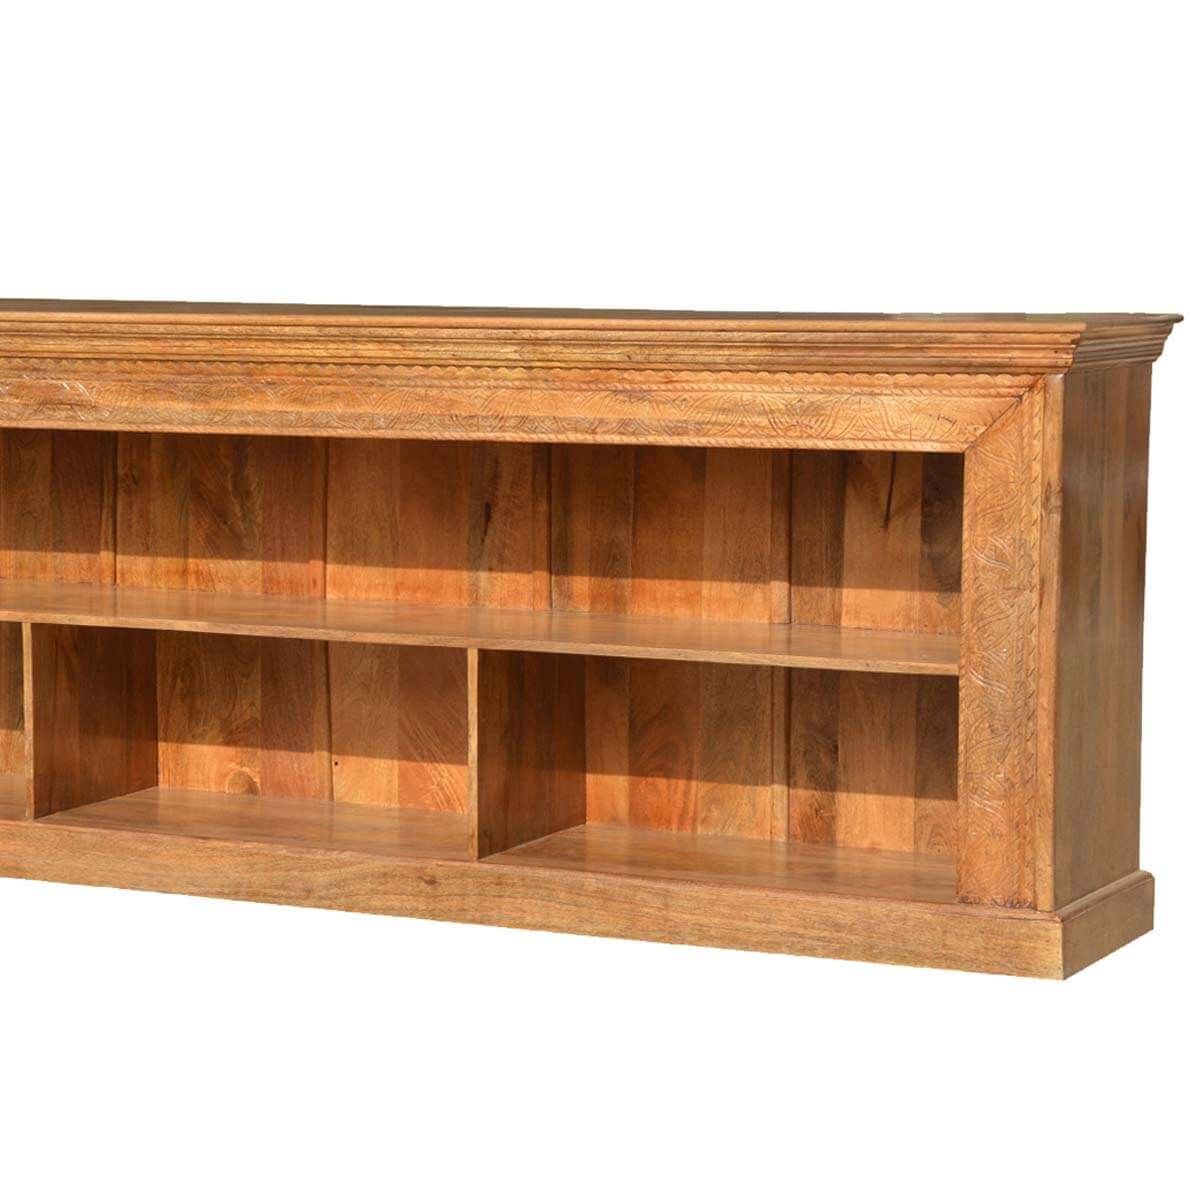 Large Hand Carved Solid Wood Bookcase 150" Long Tv Stand Media Pertaining To Long Wood Tv Stands (View 6 of 15)